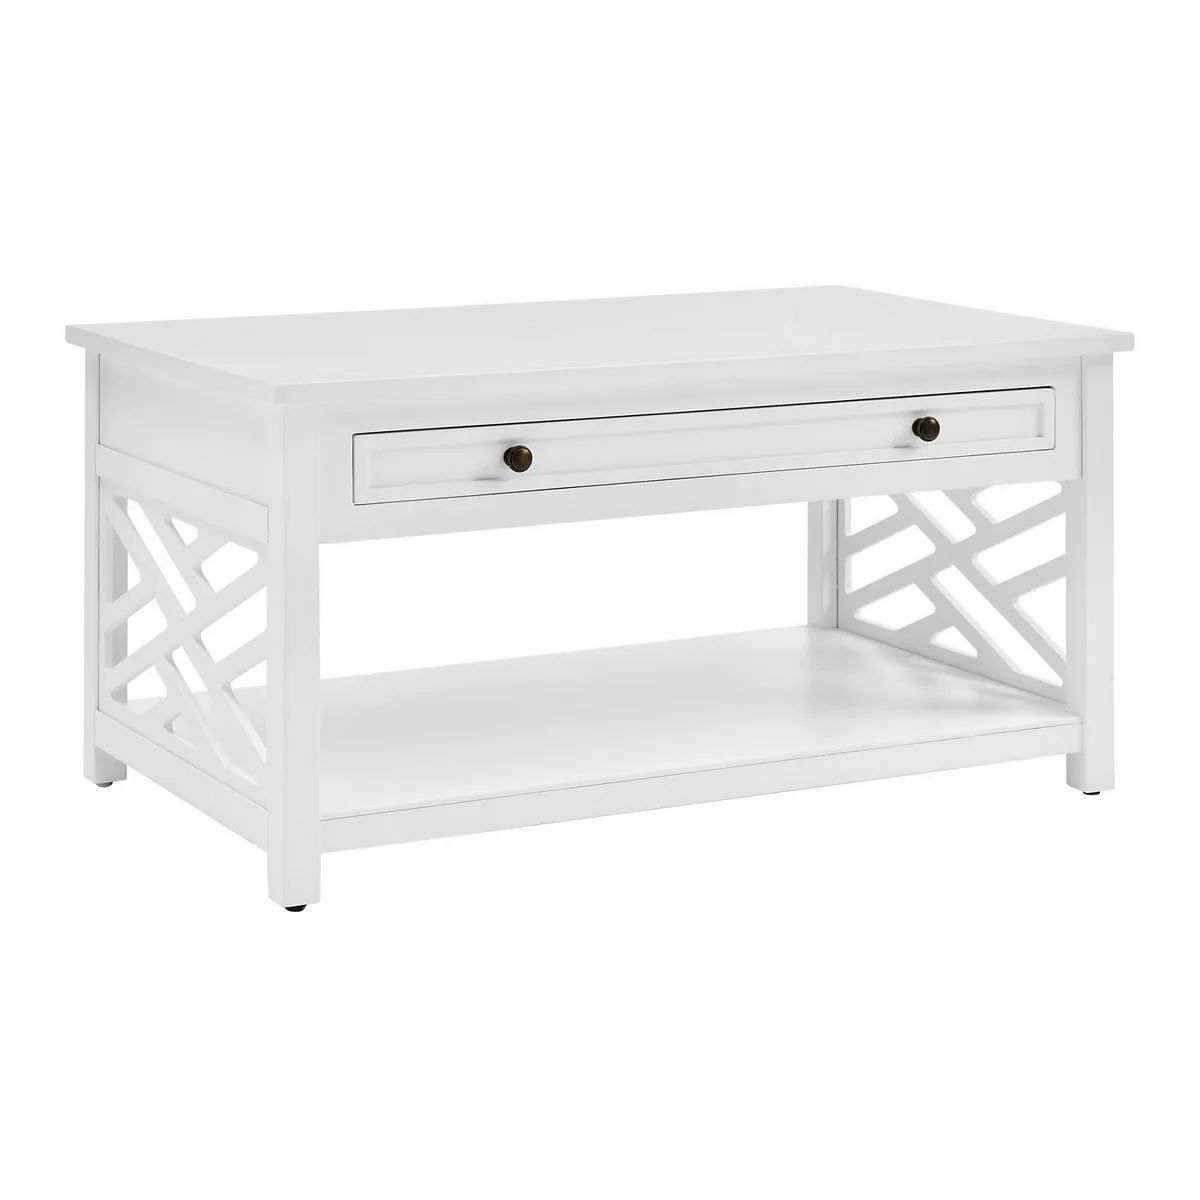 Alaterre Furniture Coventry Coffee Table | Kohl's